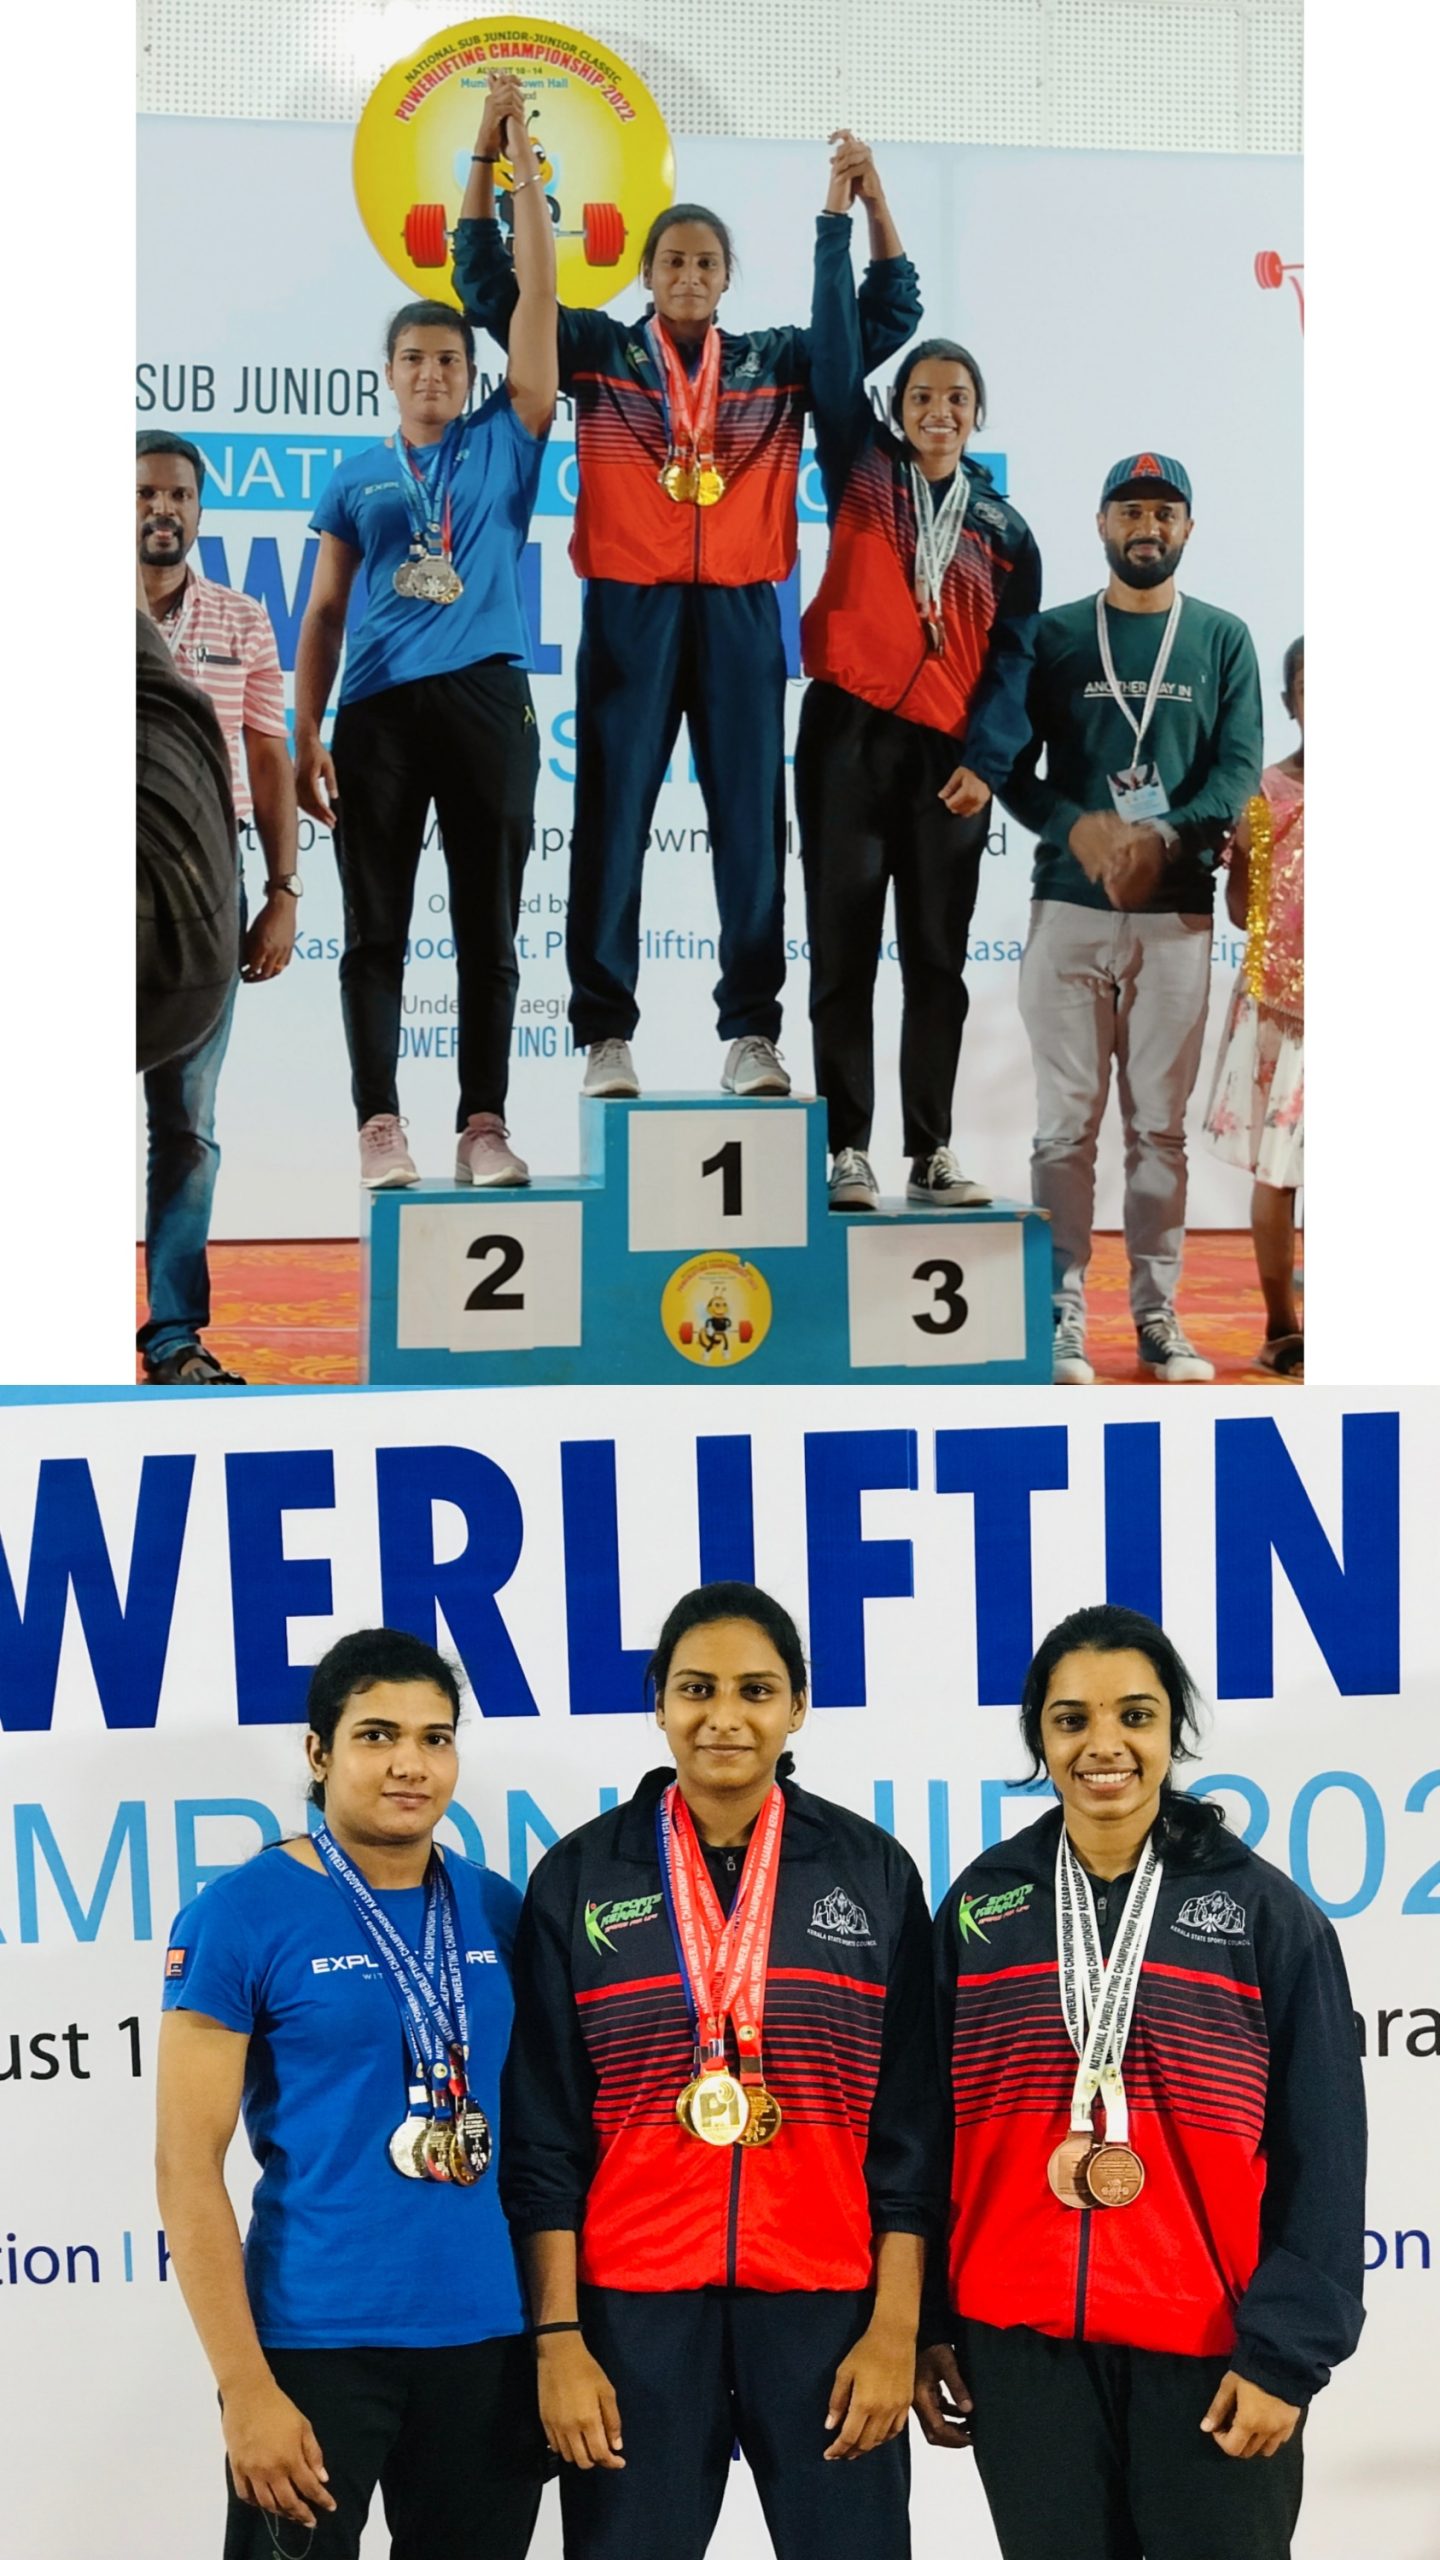 Nandana K V of Second Year BCom Won Gold Medal in National Classic Powerlifting Junior (63kg)